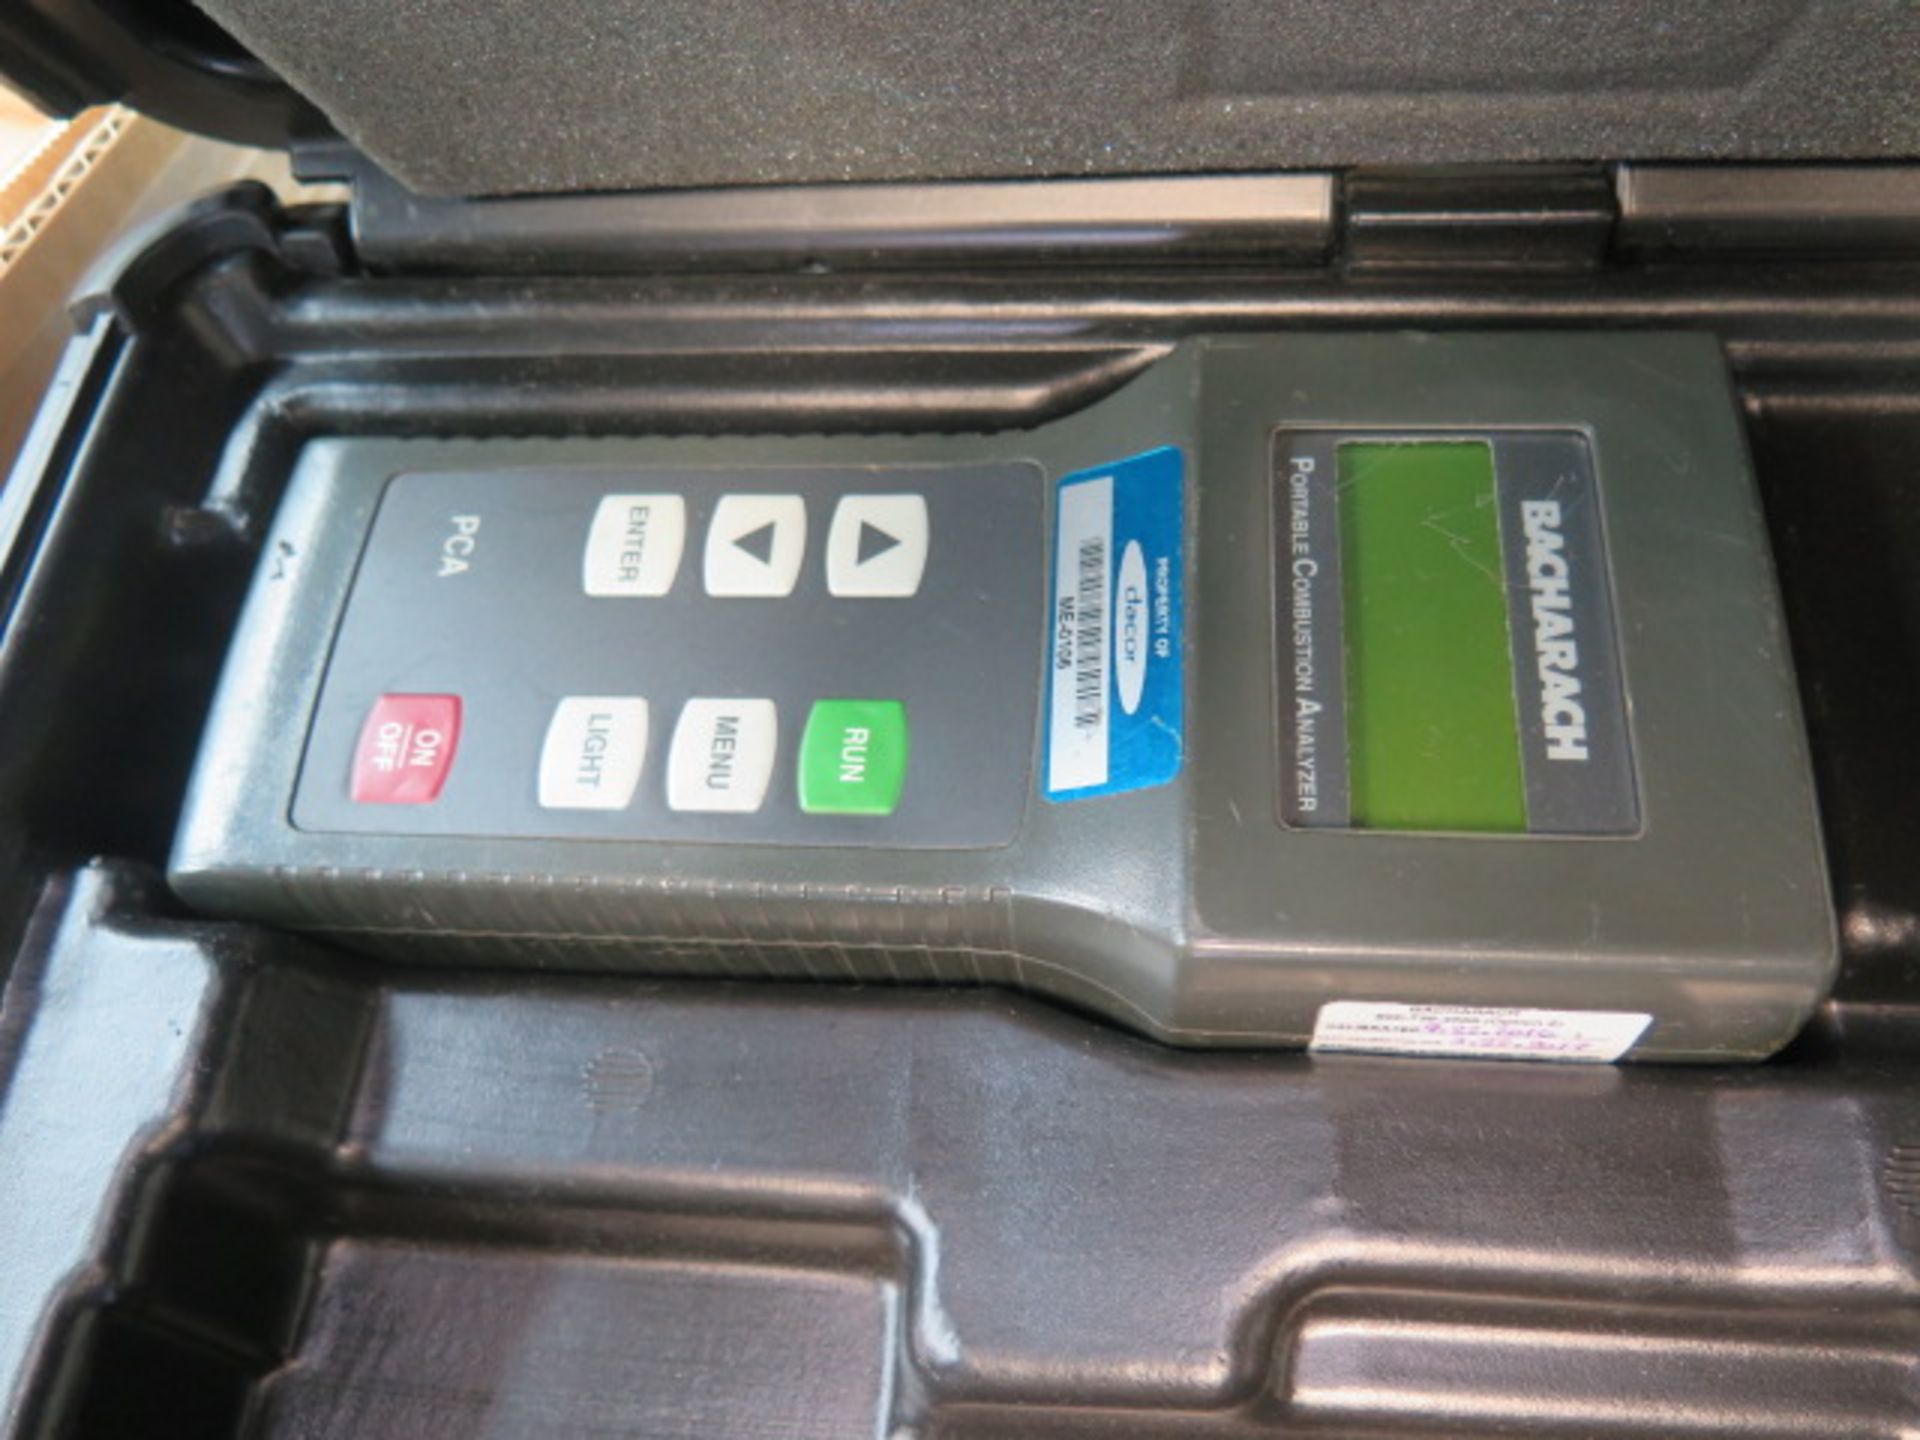 Bacharack Portable Combustion Analyzers (2) (SOLD AS-IS - NO WARRANTY) - Image 6 of 7